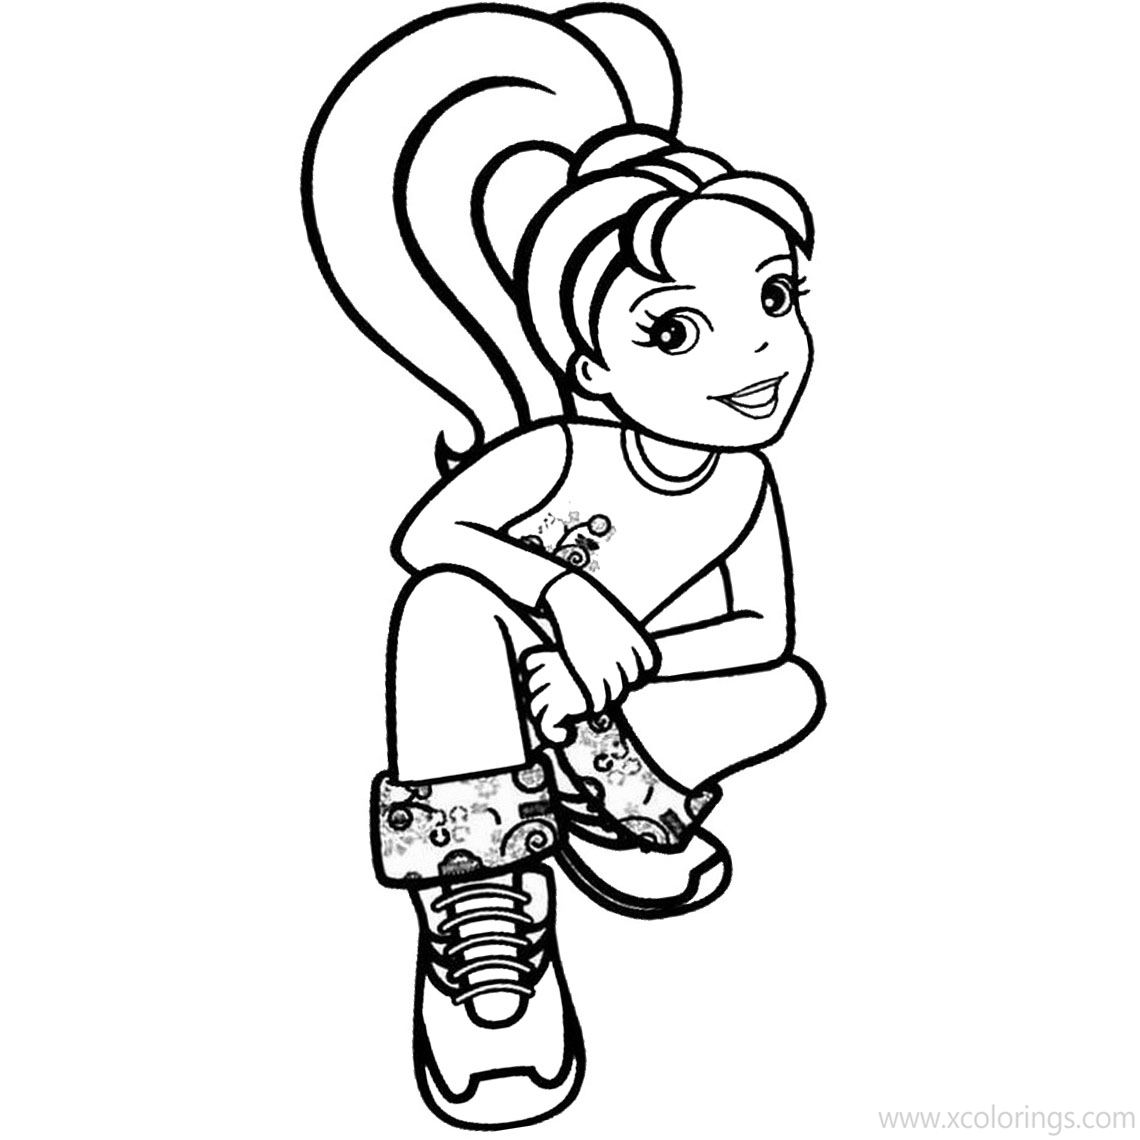 Free Cartoon Polly Pocket Coloring Pages printable